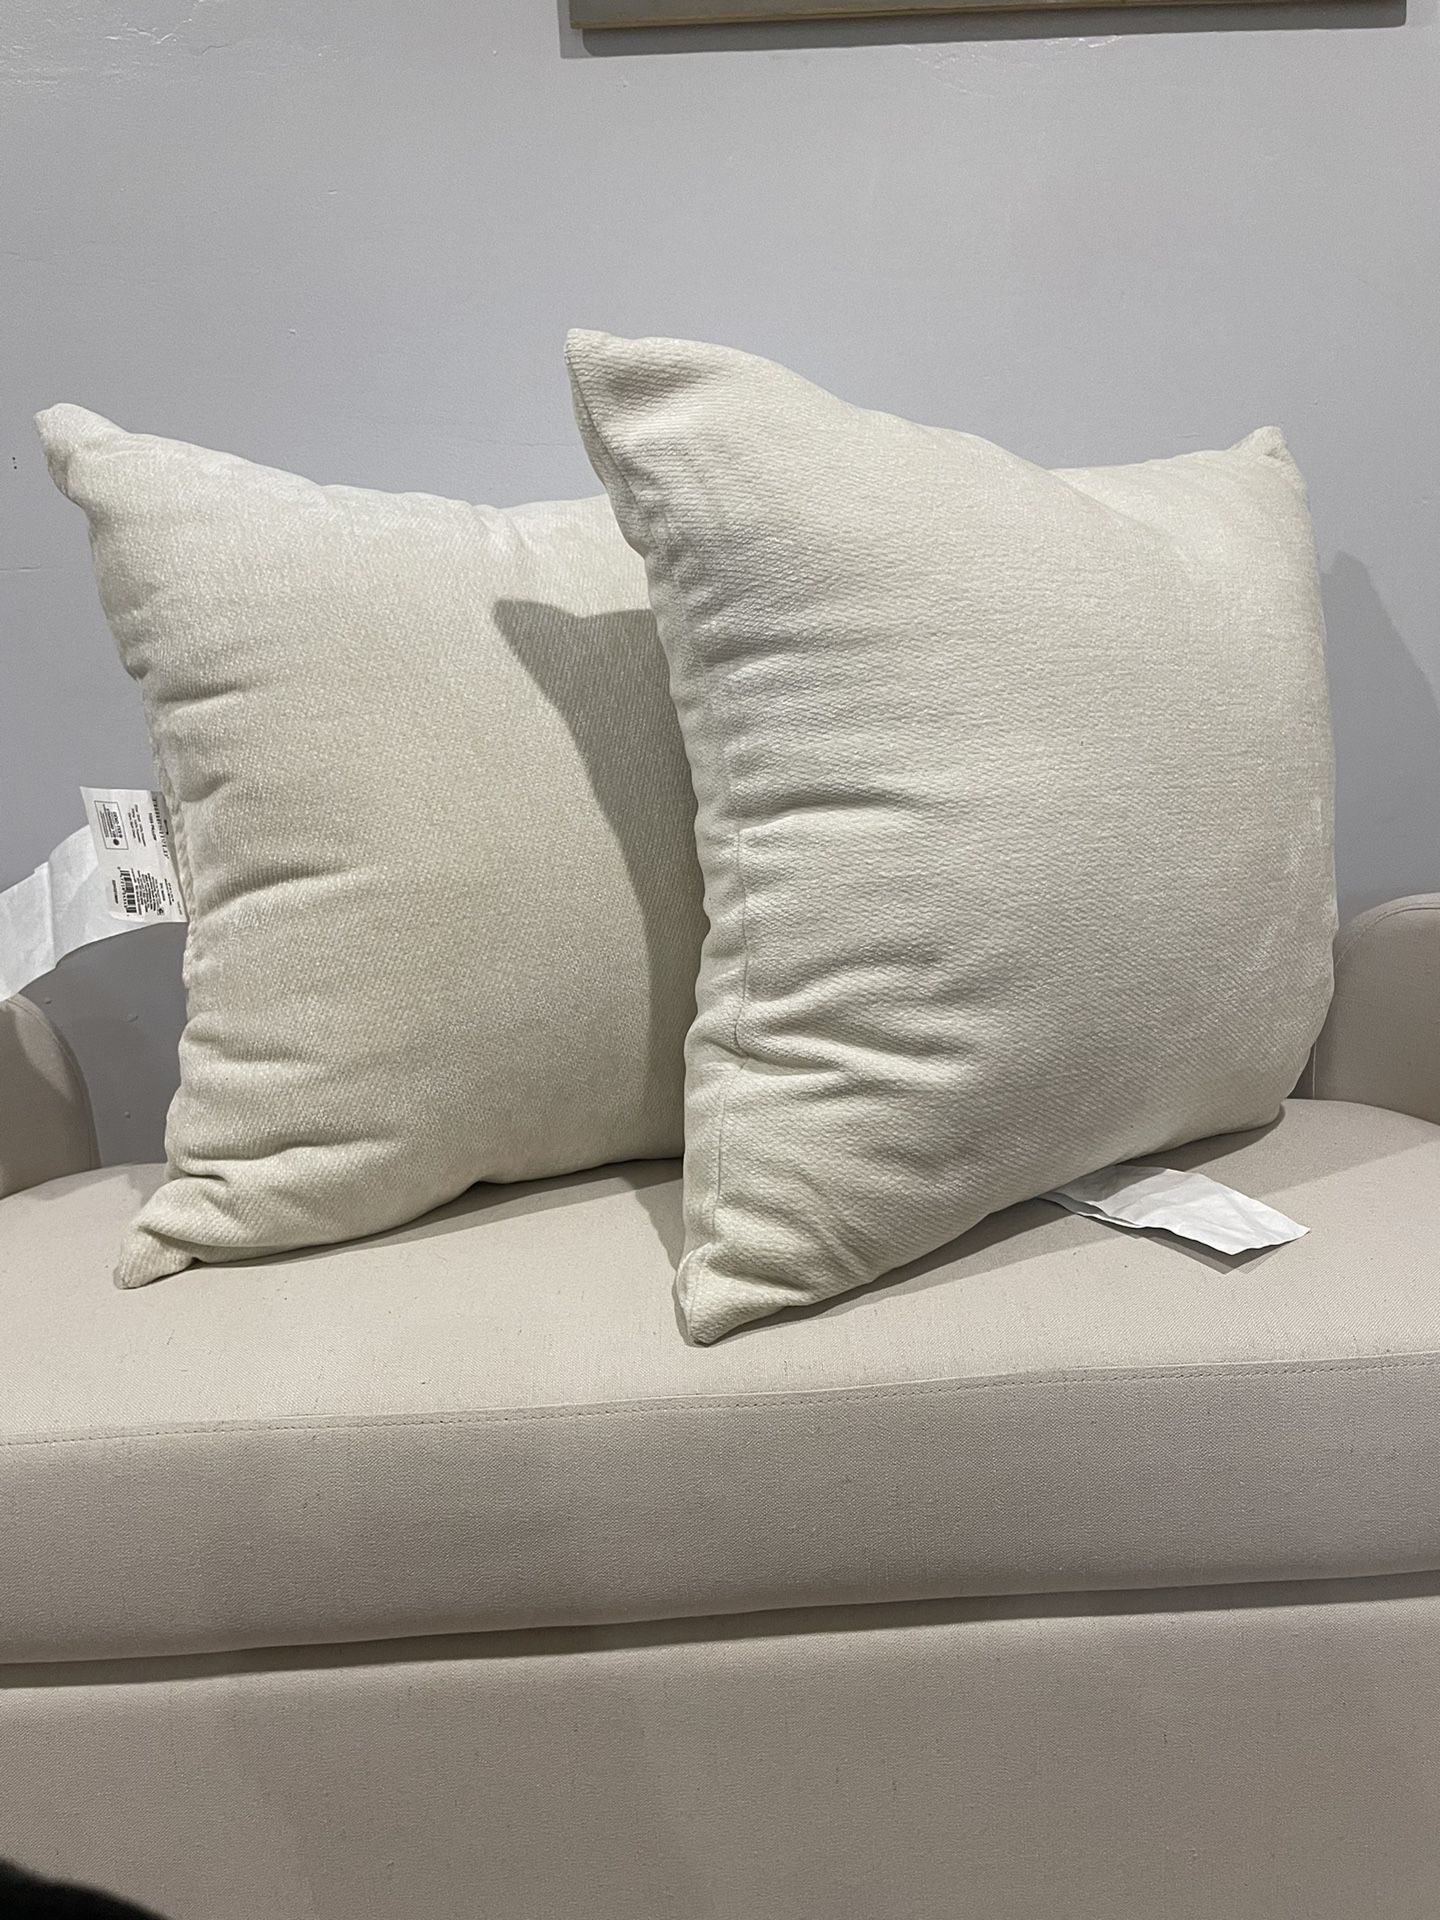 New Two Oversized Chenille Square Throw Pillows Cream - Threshold™